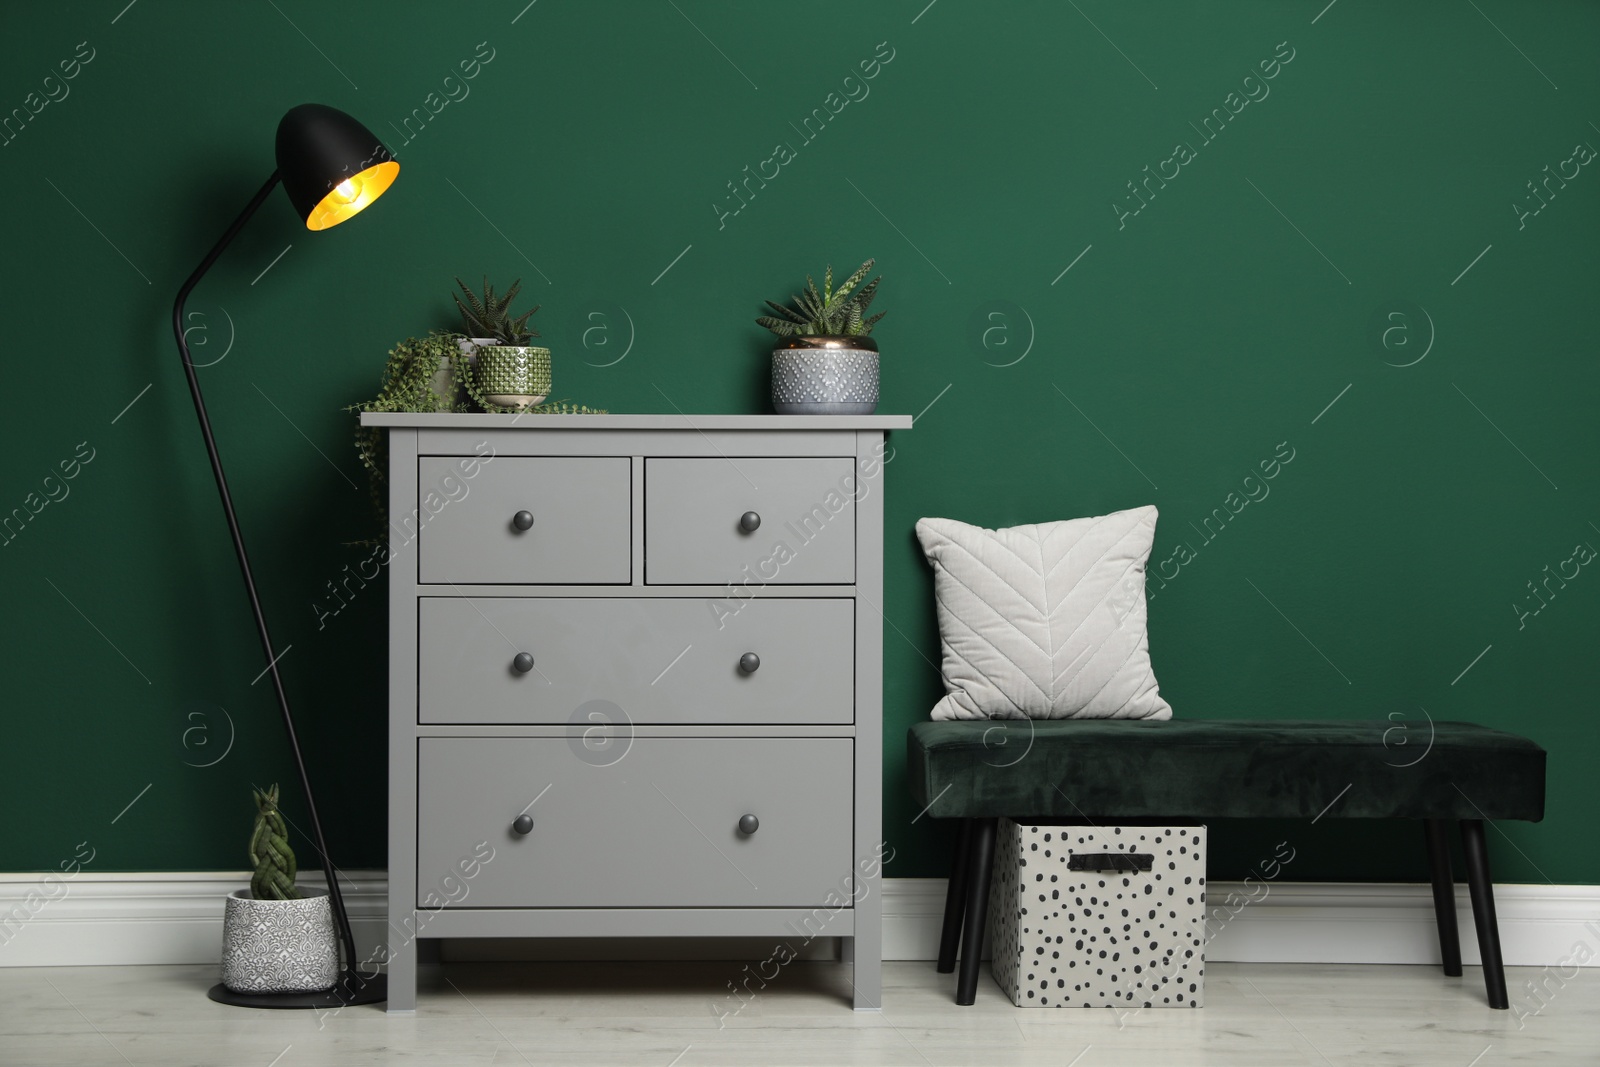 Photo of Modern chest of drawers, lamp and comfortable bench near green wall indoors